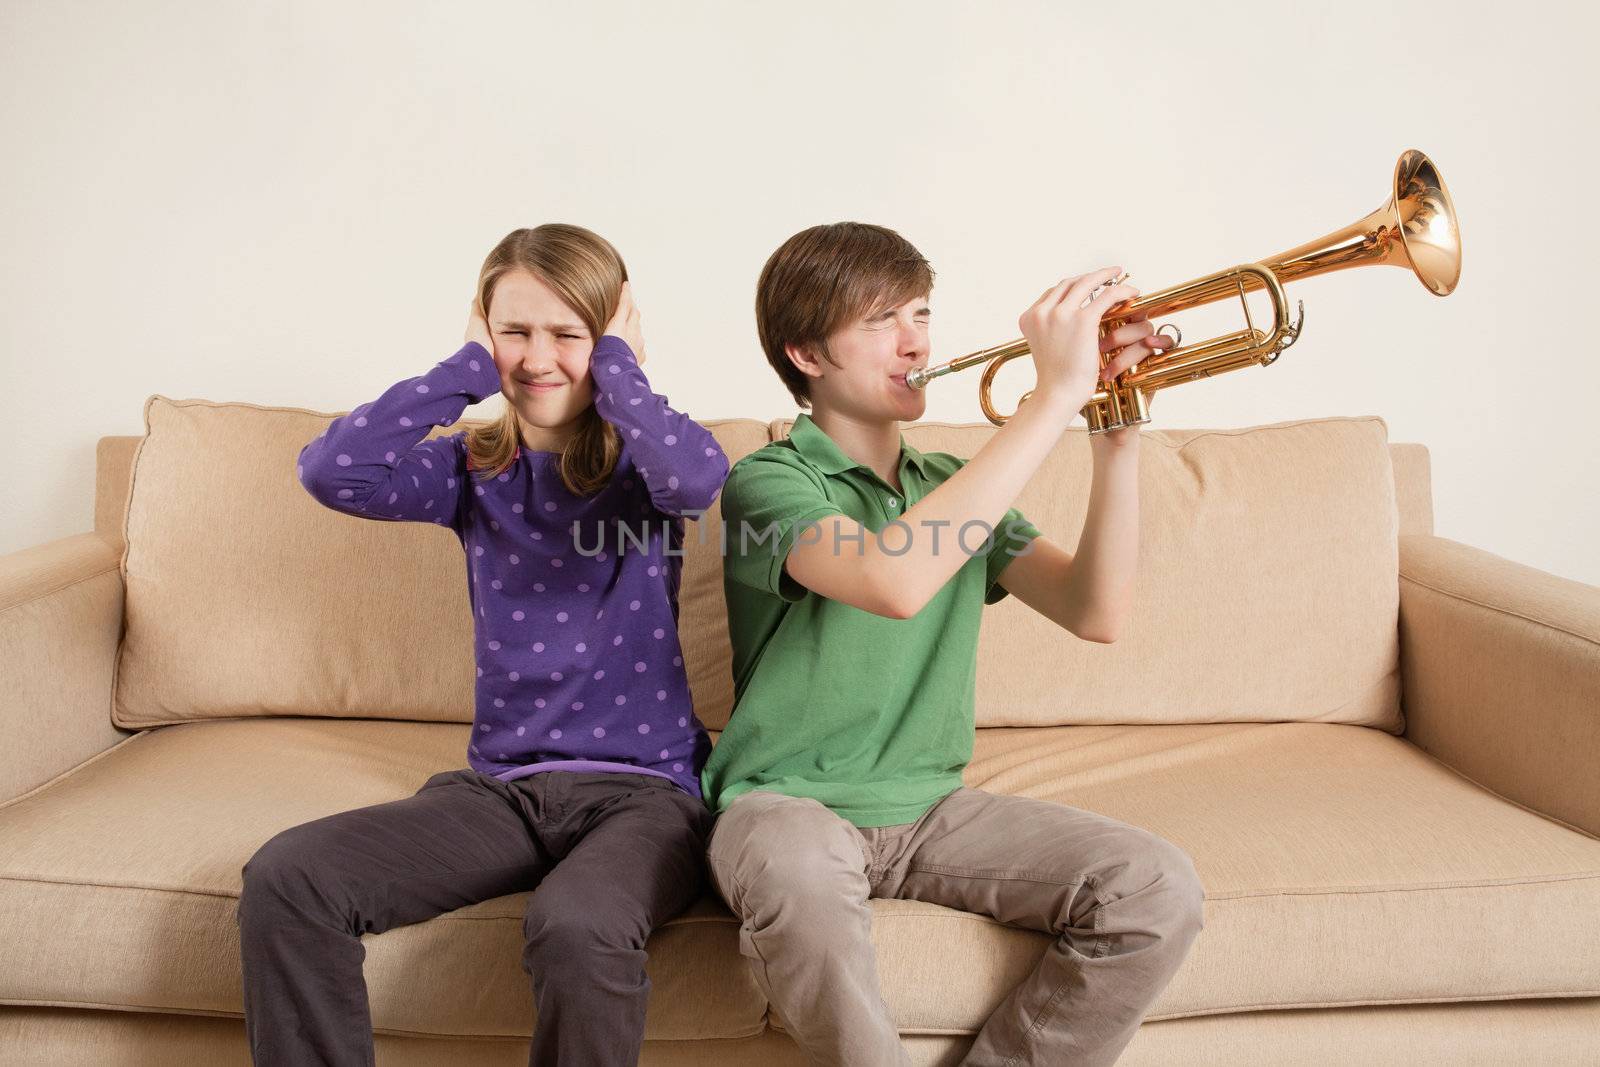 Playing trumpet badly by sumners